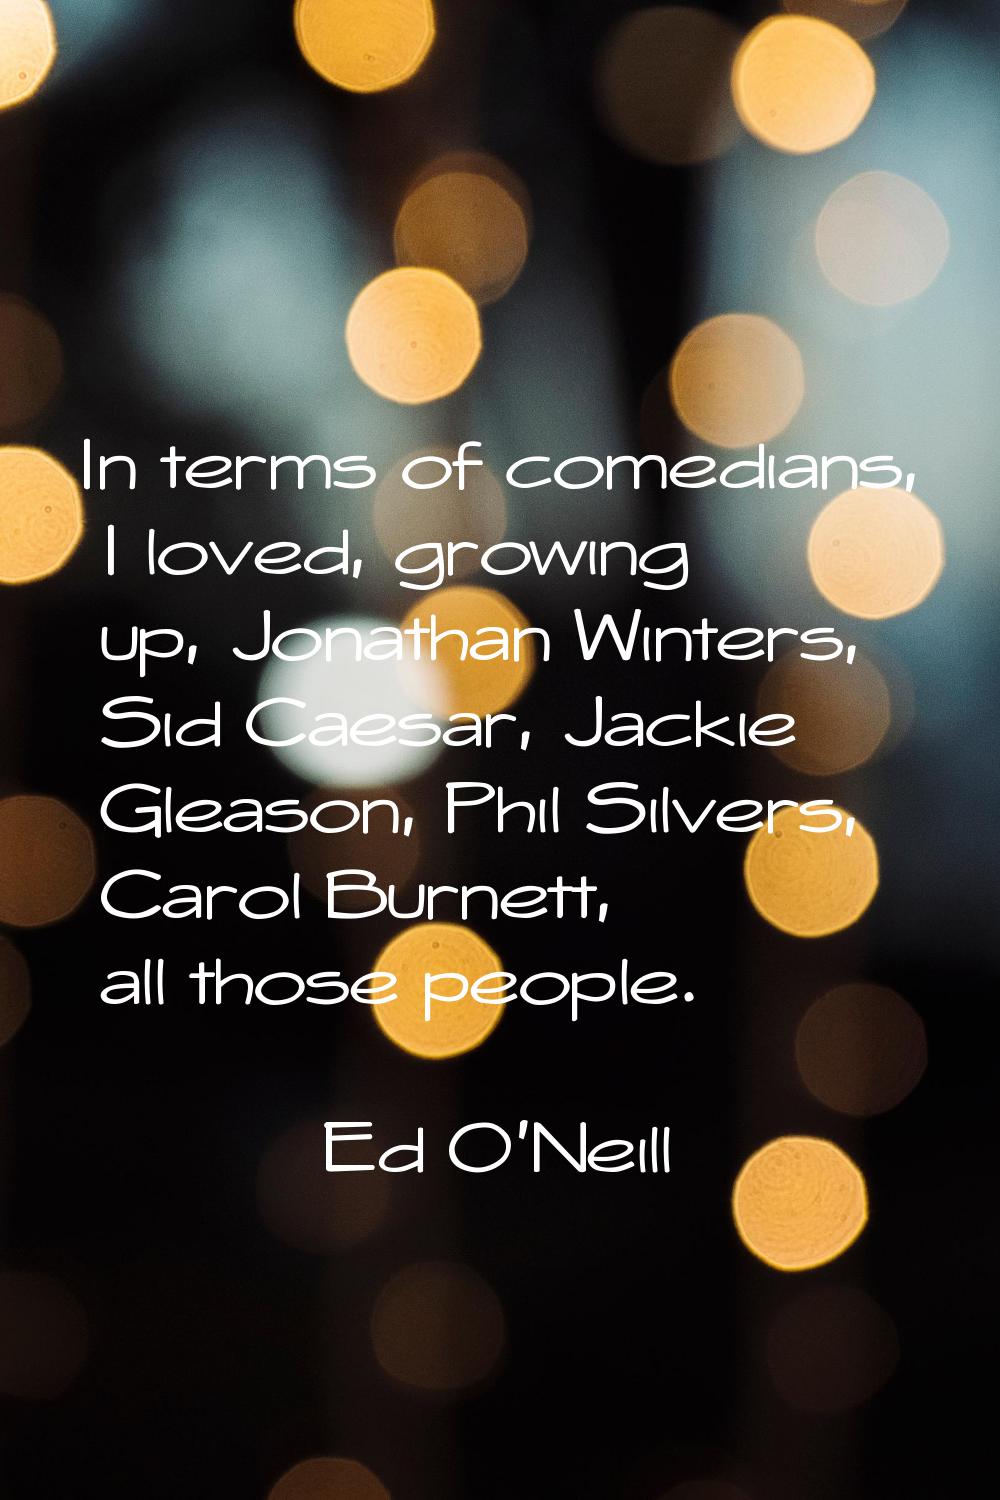 In terms of comedians, I loved, growing up, Jonathan Winters, Sid Caesar, Jackie Gleason, Phil Silv